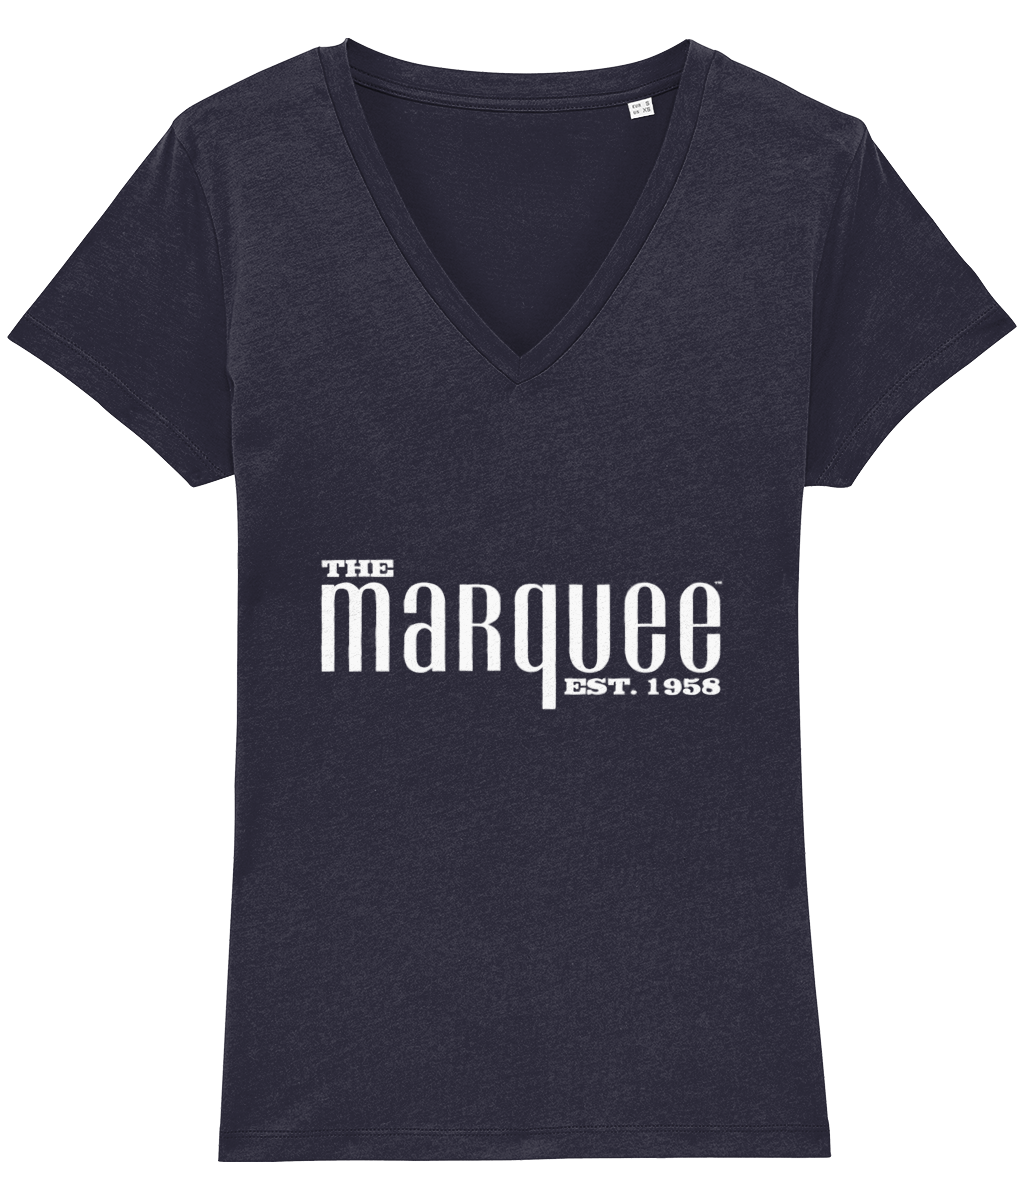 The Marquee Women's V-Neck T-Shirt